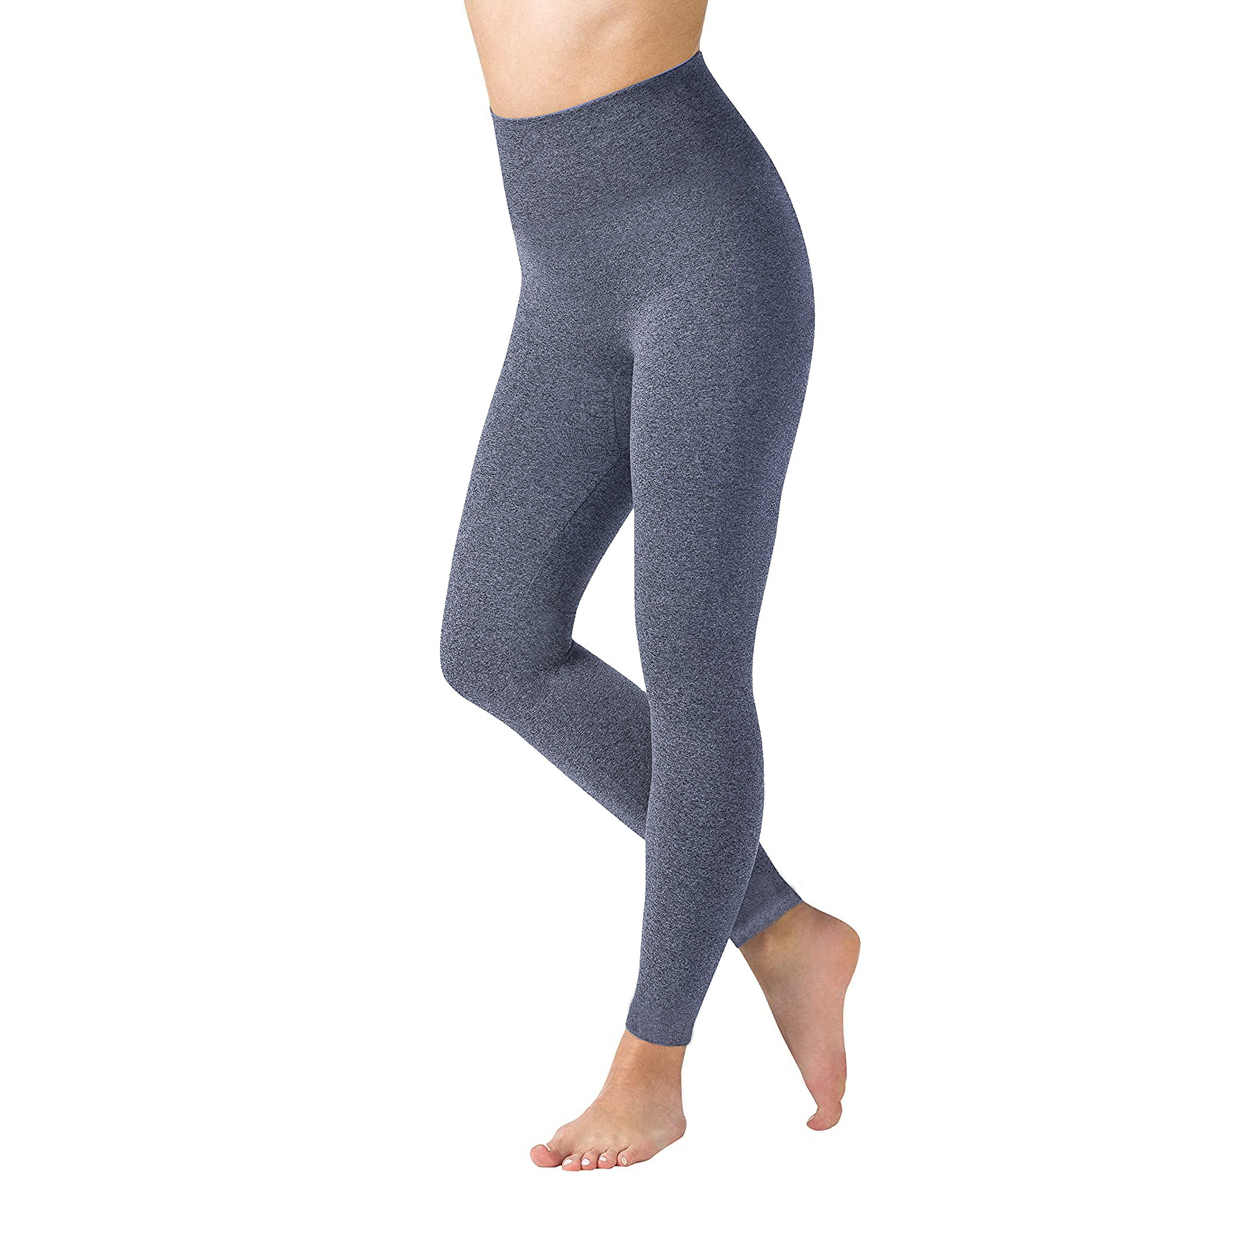 Multi-Pack: Women's High Waisted Ultra-Soft Fleece Lined Warm Marled Leggings(Available In Plus Sizes) - 2-pack, Charcoal & Navy, 2x